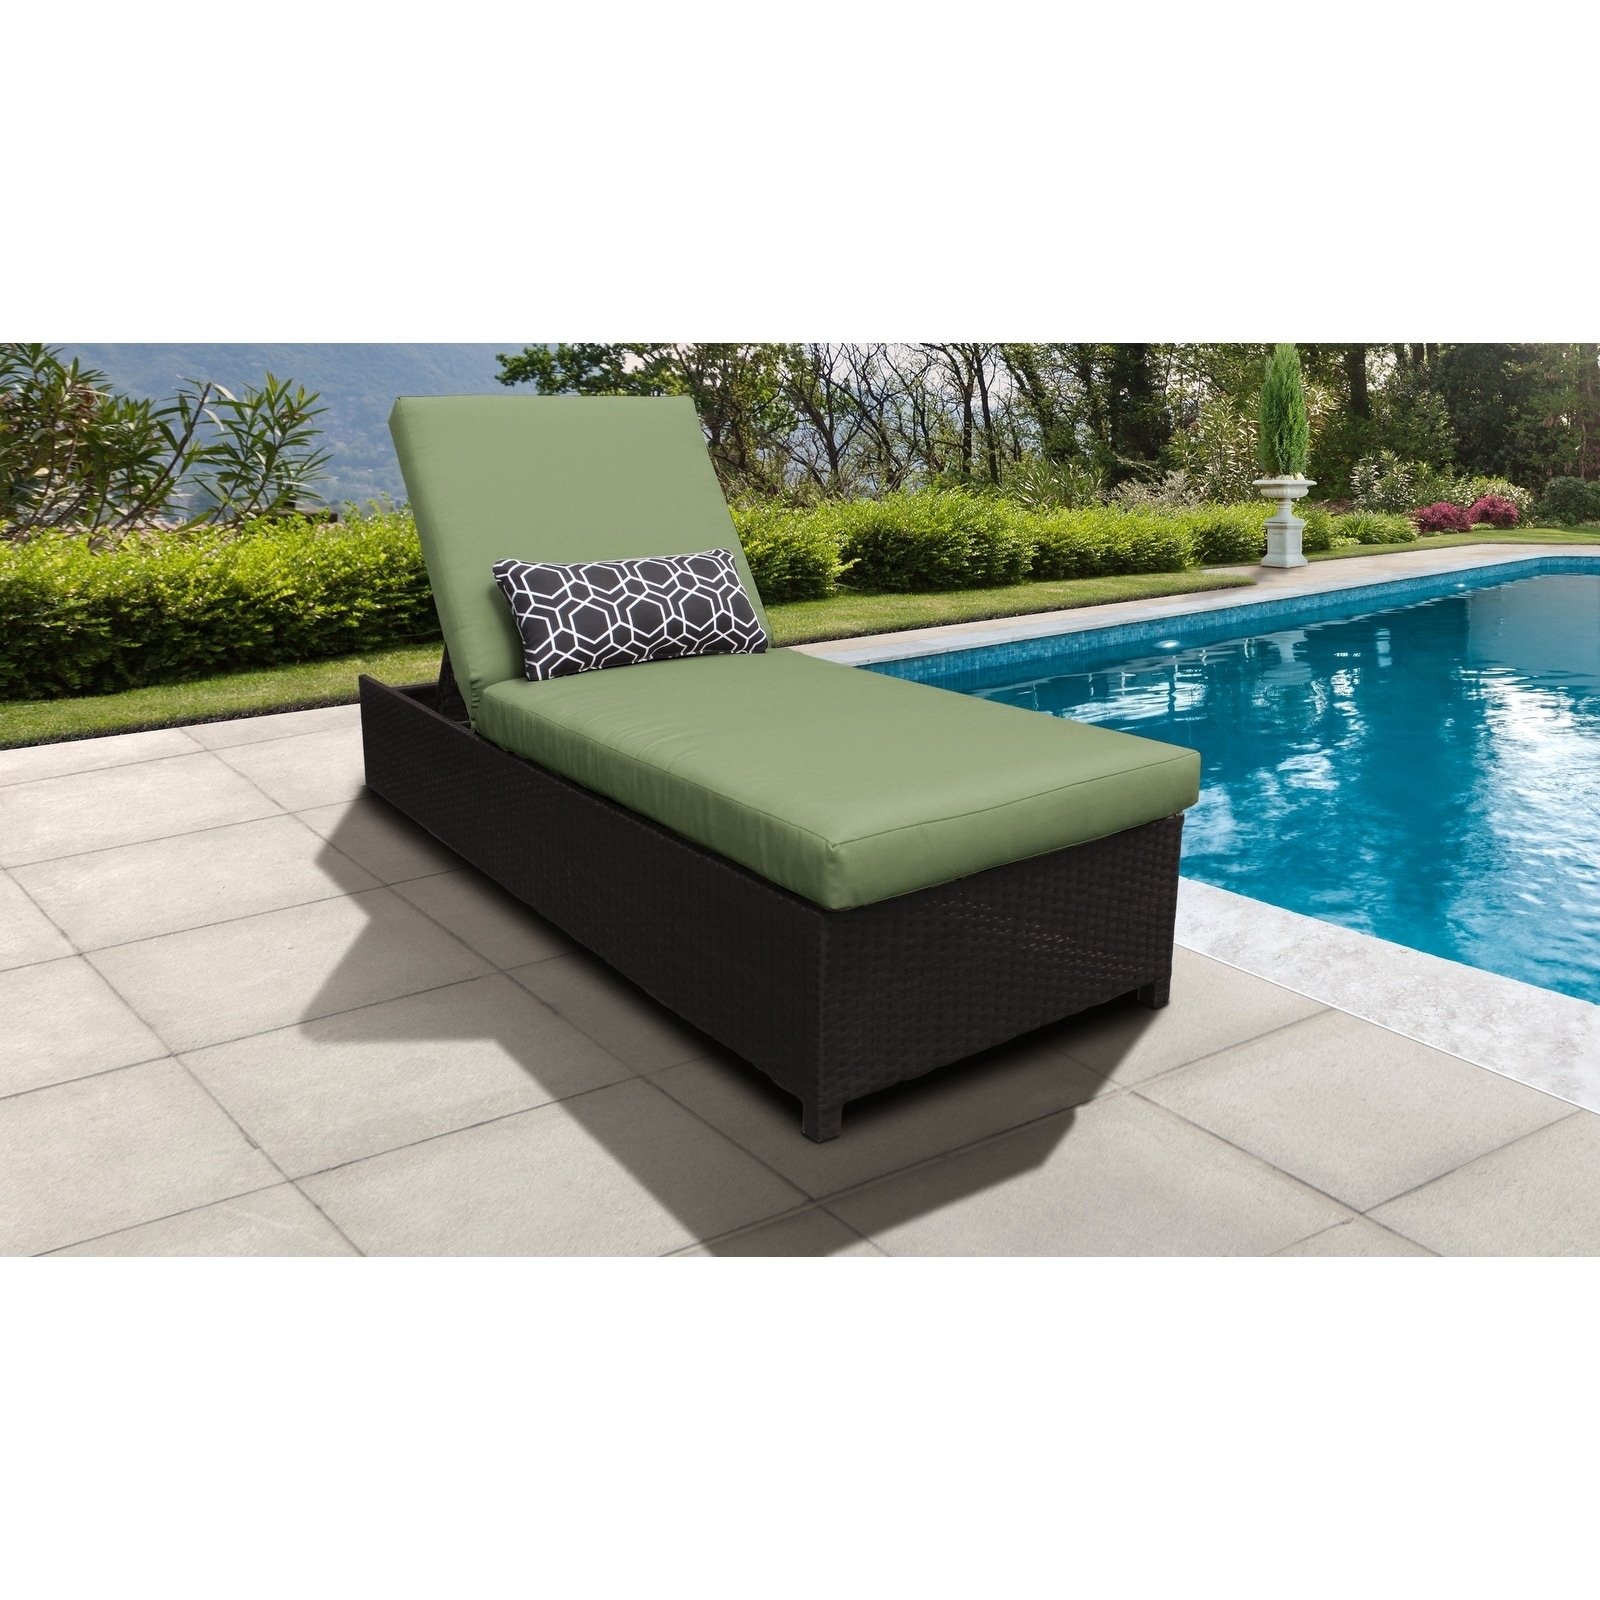 Belle Wheeled Chaise Outdoor Wicker Patio Furniture